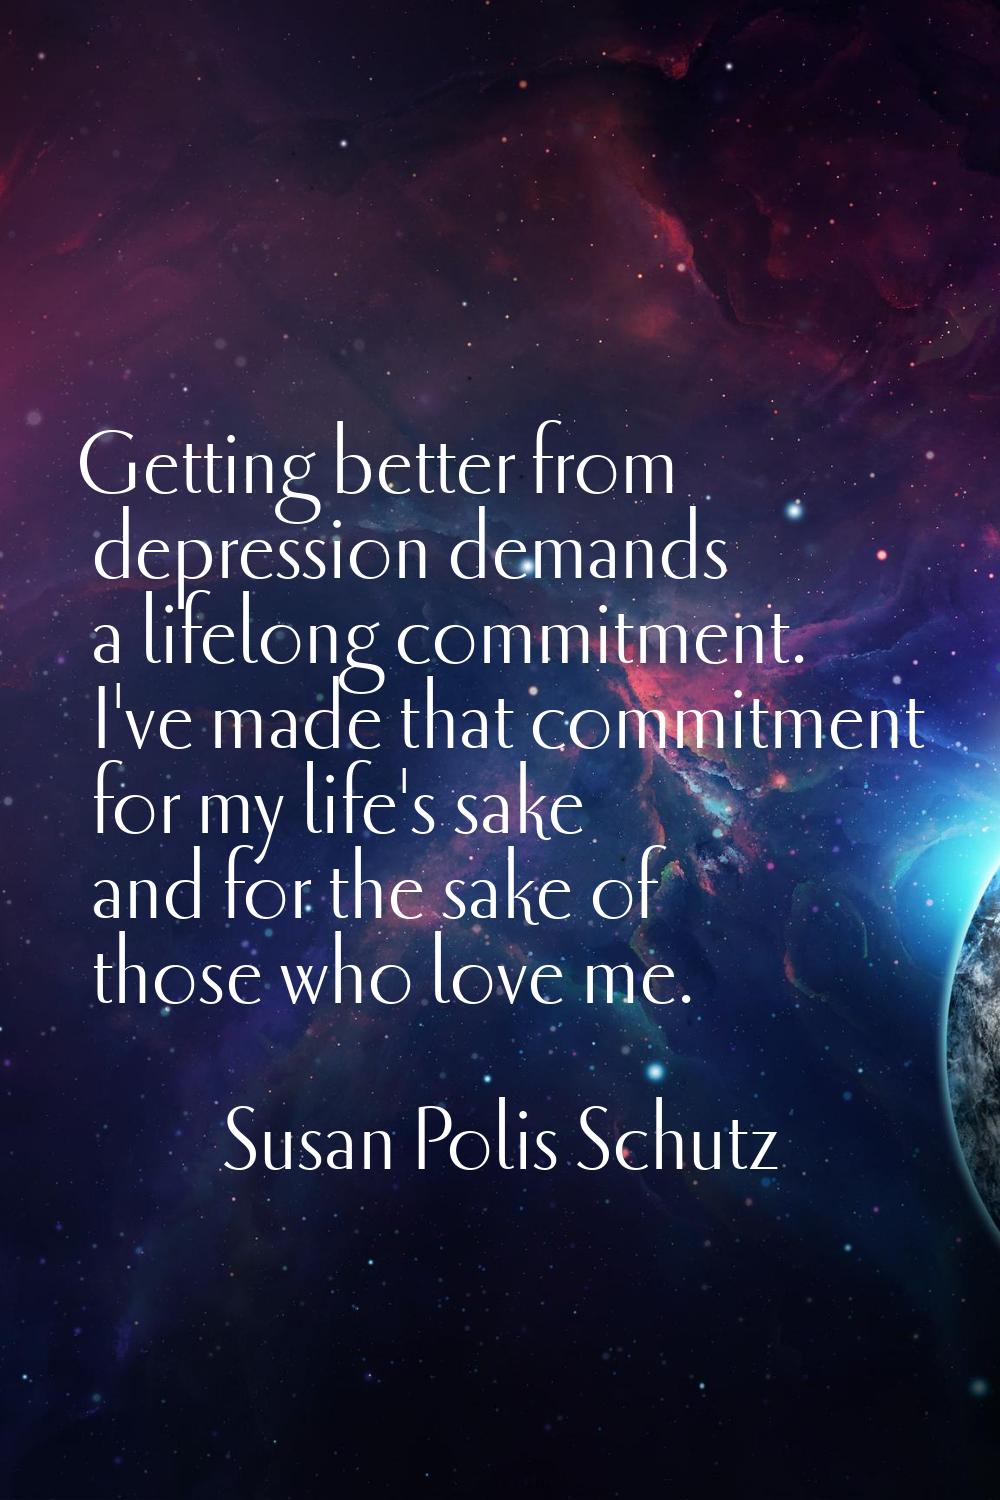 Getting better from depression demands a lifelong commitment. I've made that commitment for my life